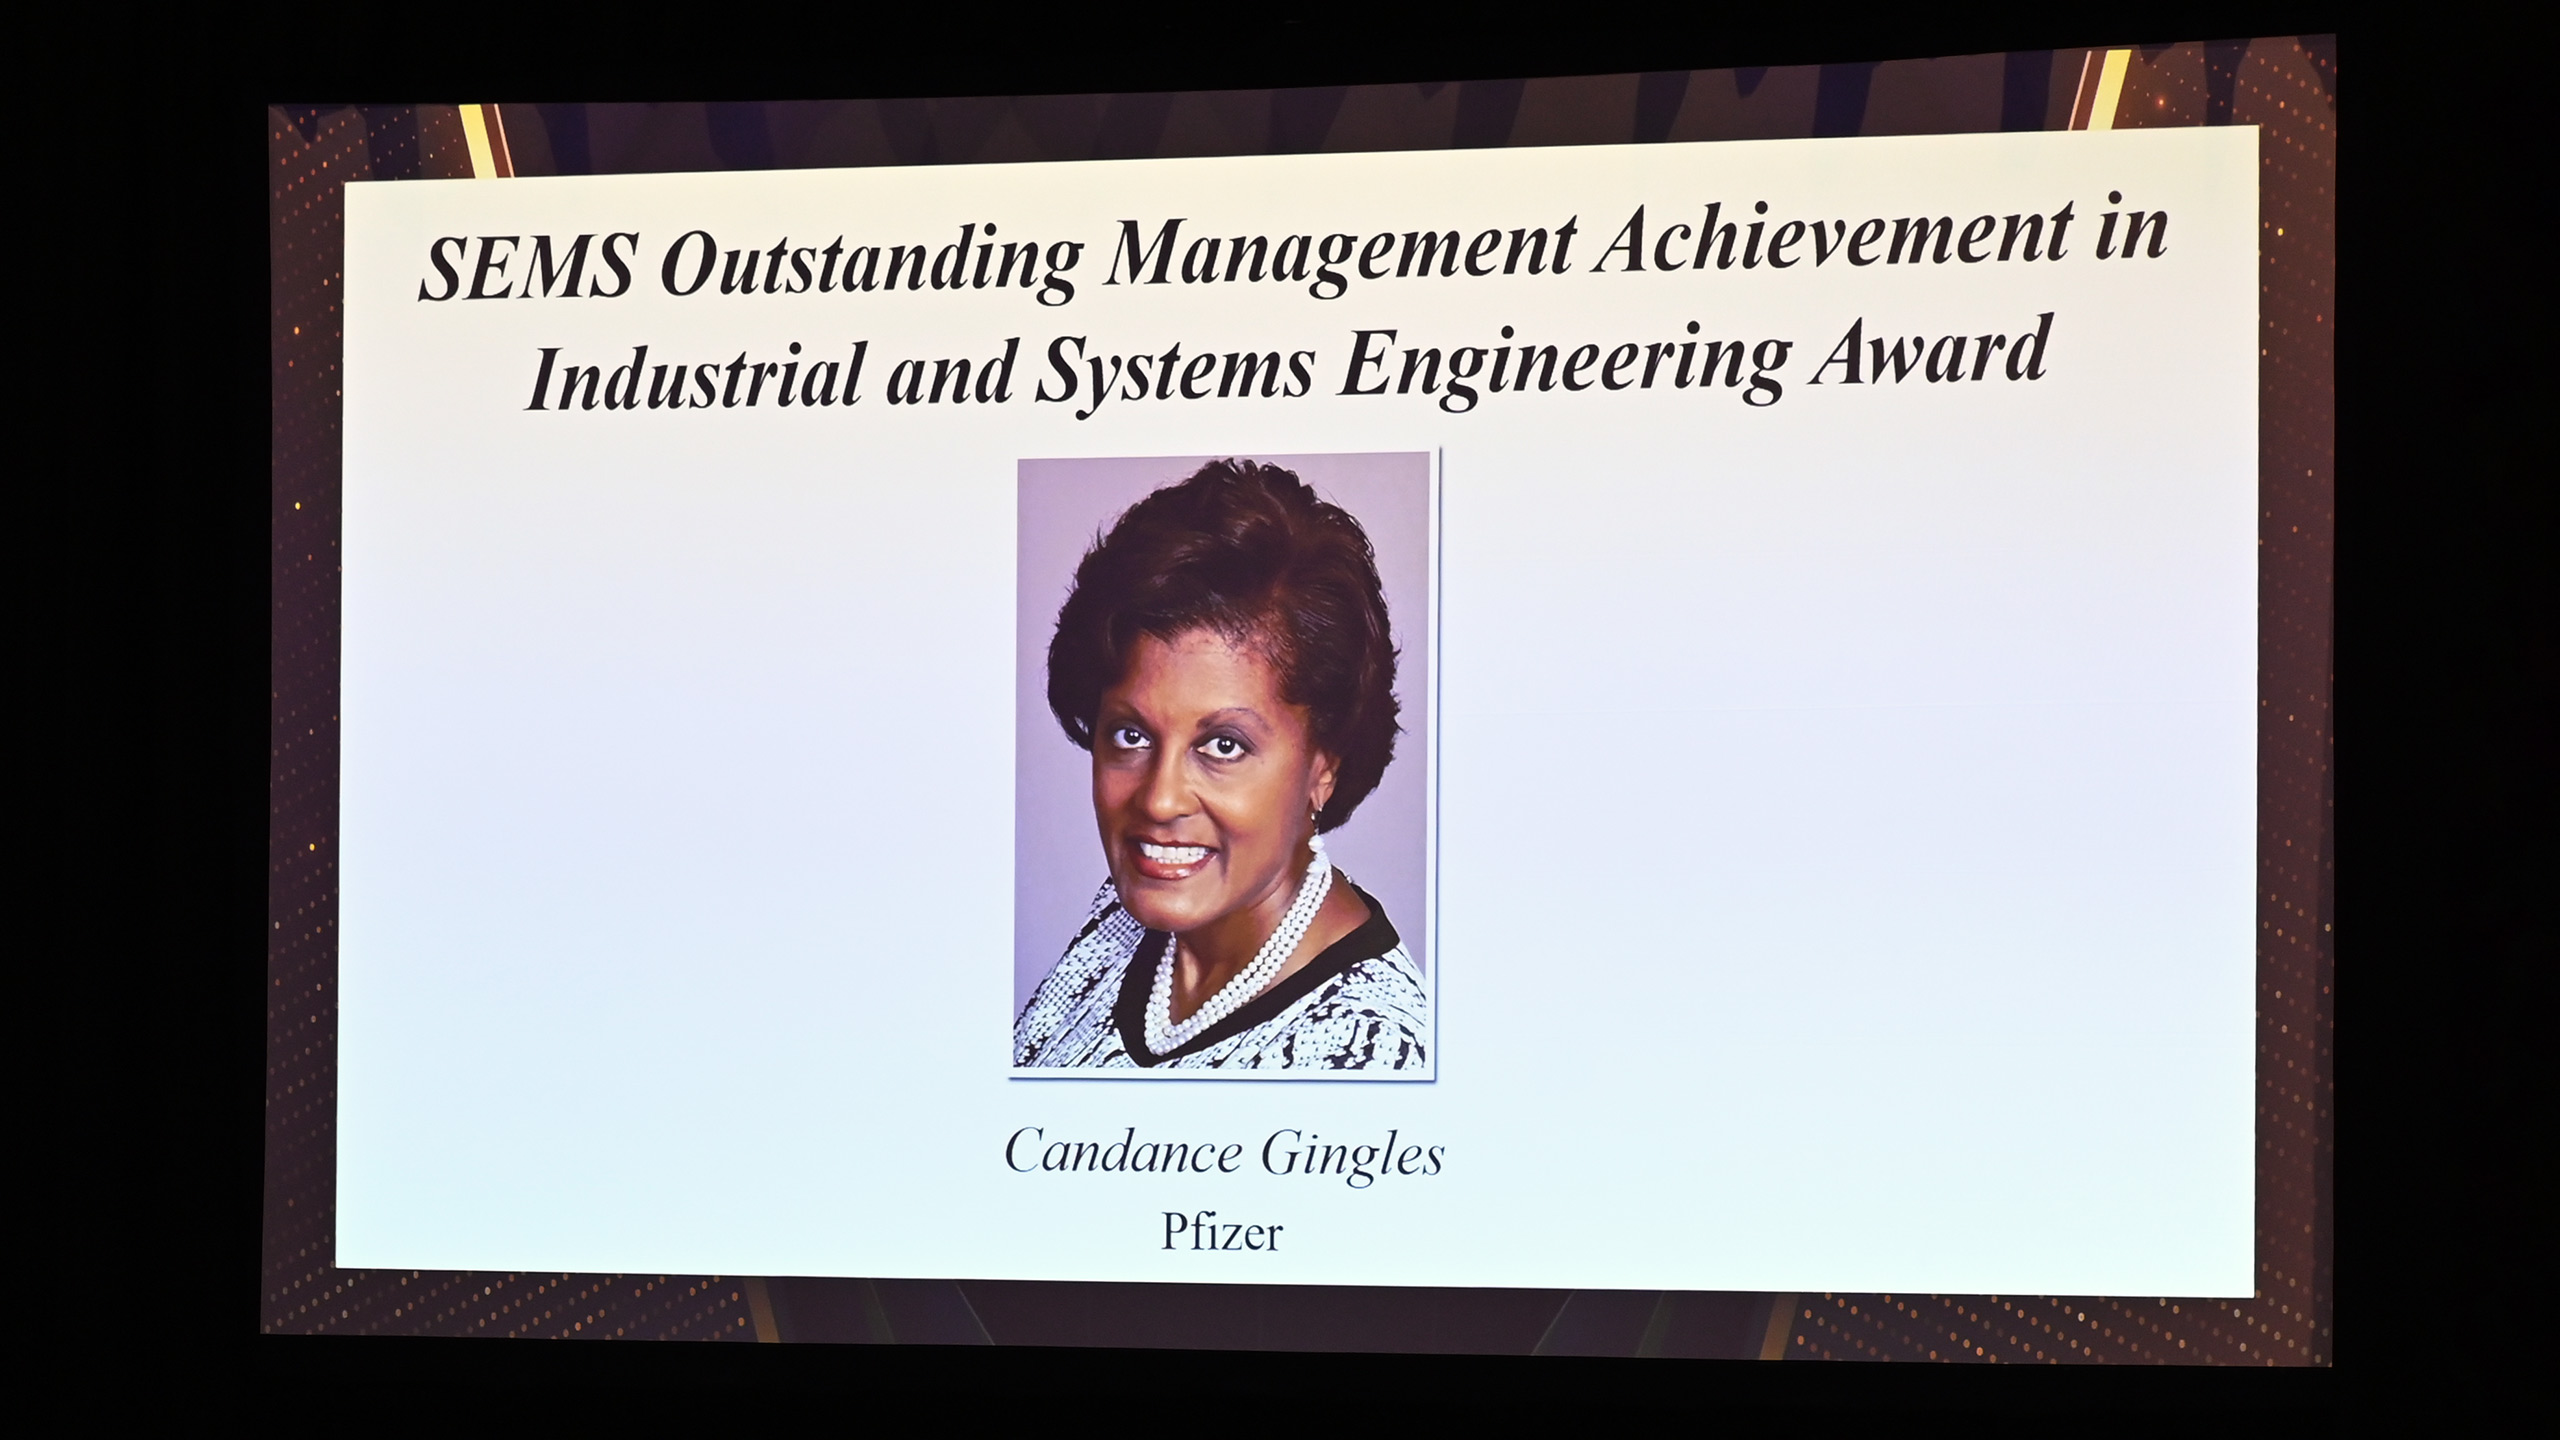 Candance Gingles wins the SEMS Outstanding Management Achievement in Industrial and Systems Engineering Award